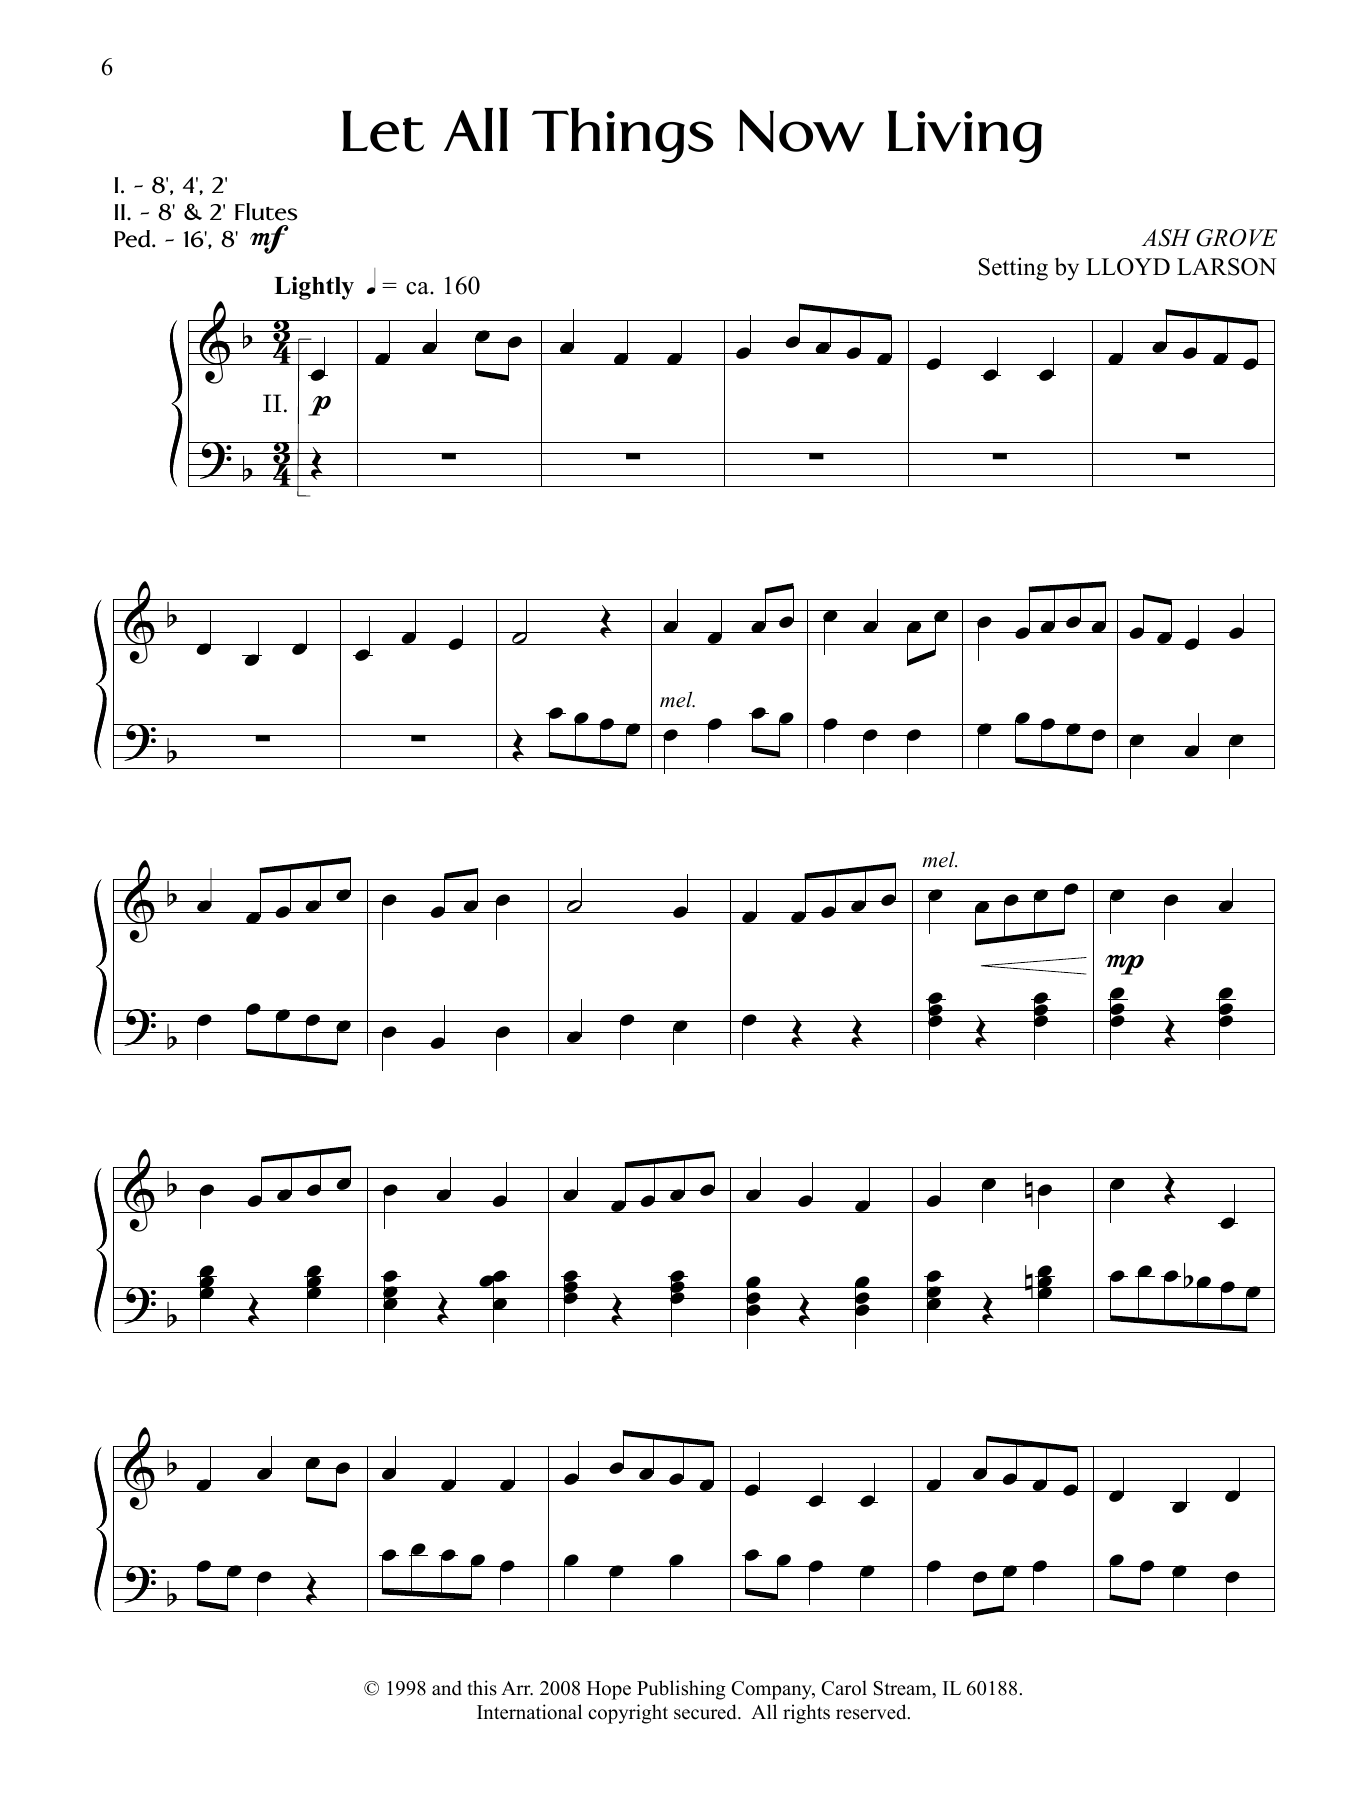 Download Lloyd Larson Let All Things Now Living Sheet Music